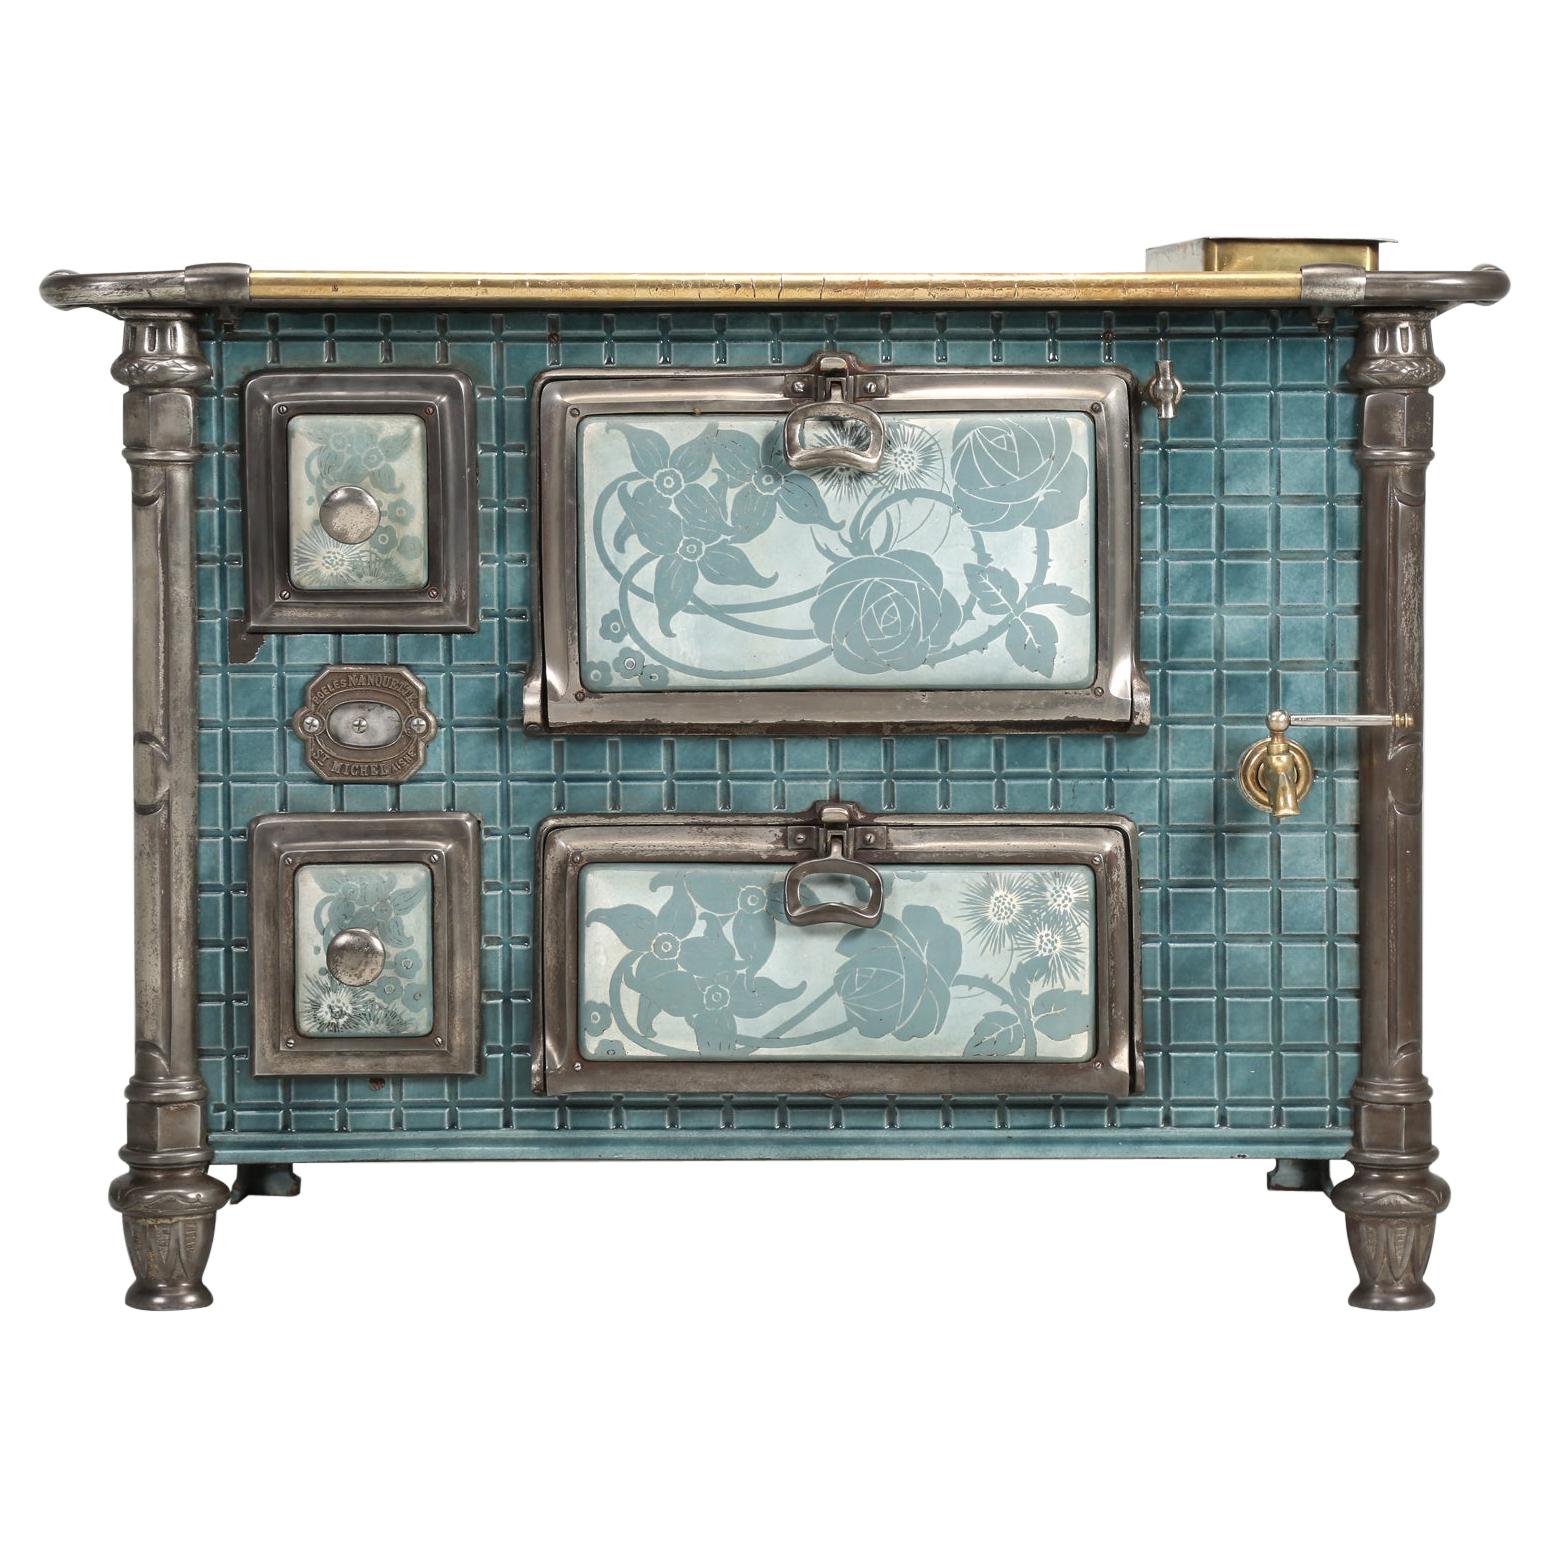 Antique French Stove or Could be a Great Bar from the Art Nouveau Period